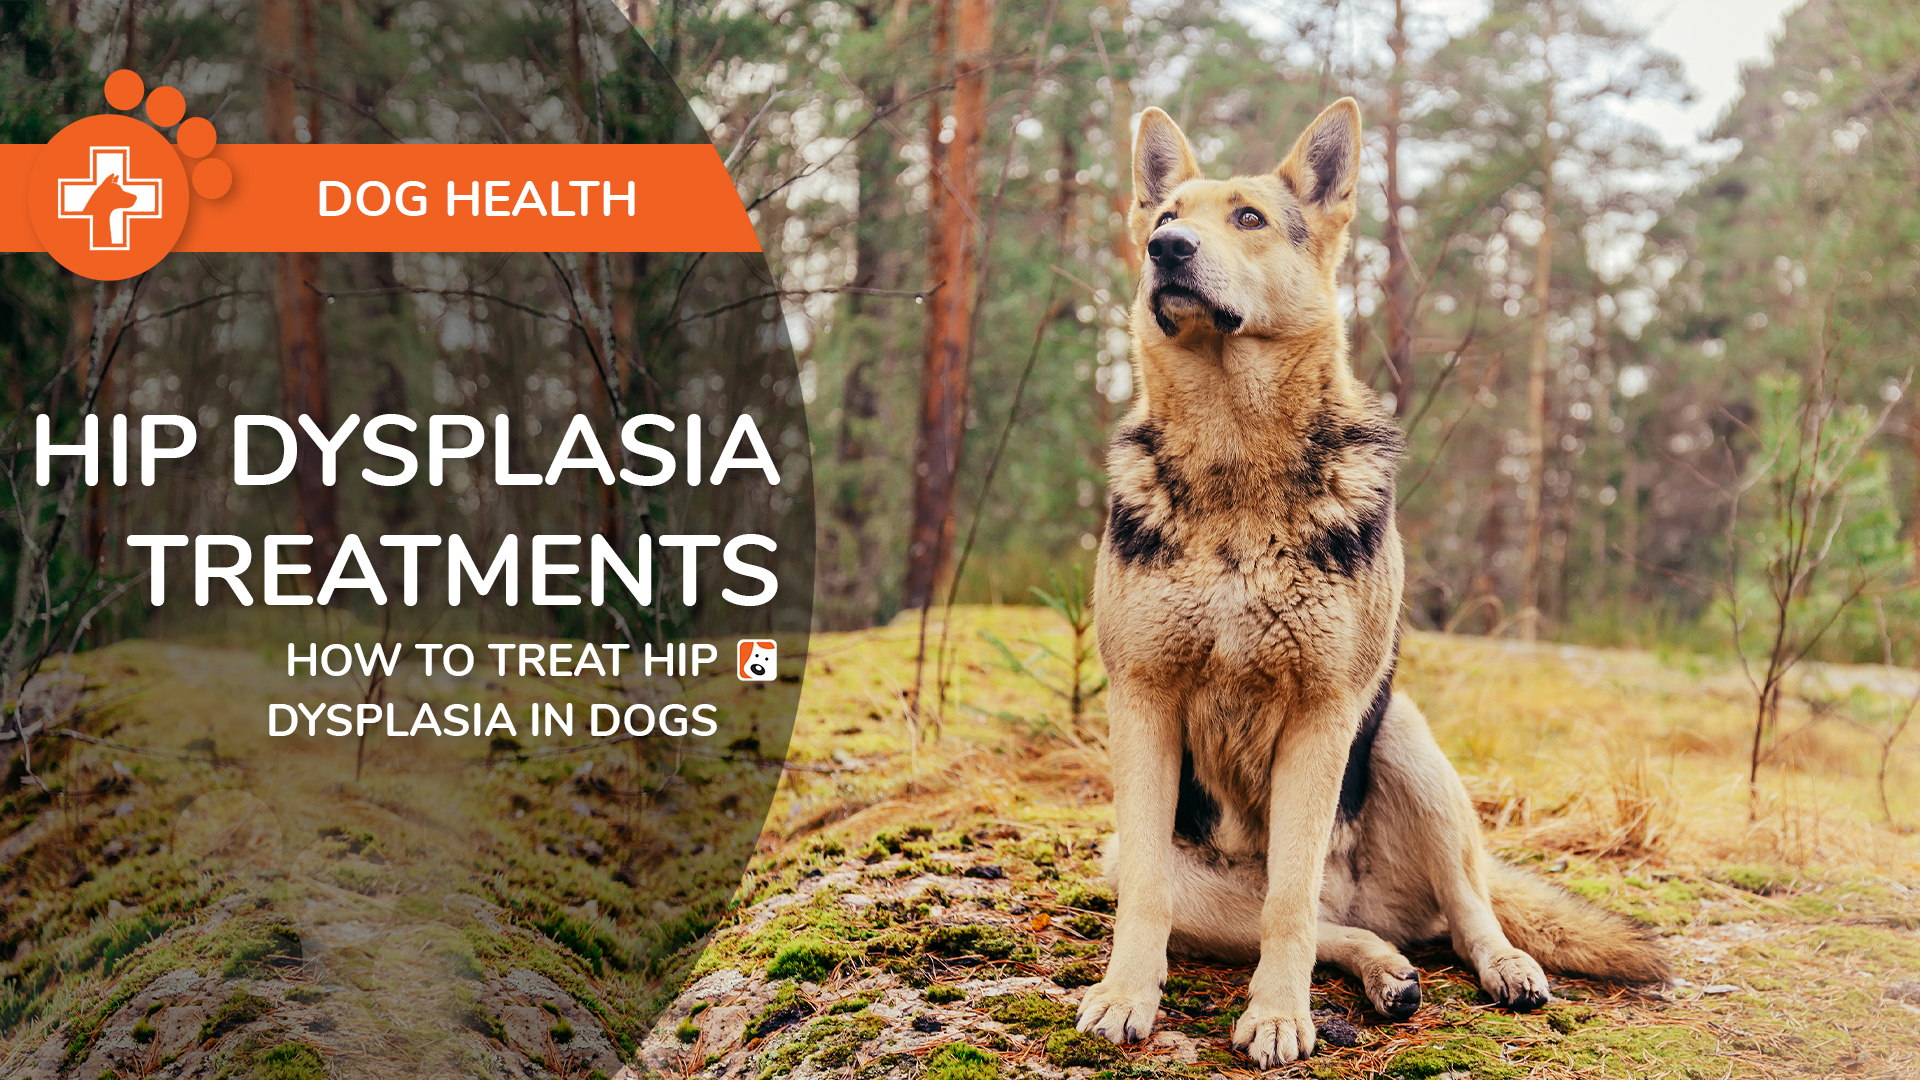 Treatment for Hip Dysplasia in Dogs